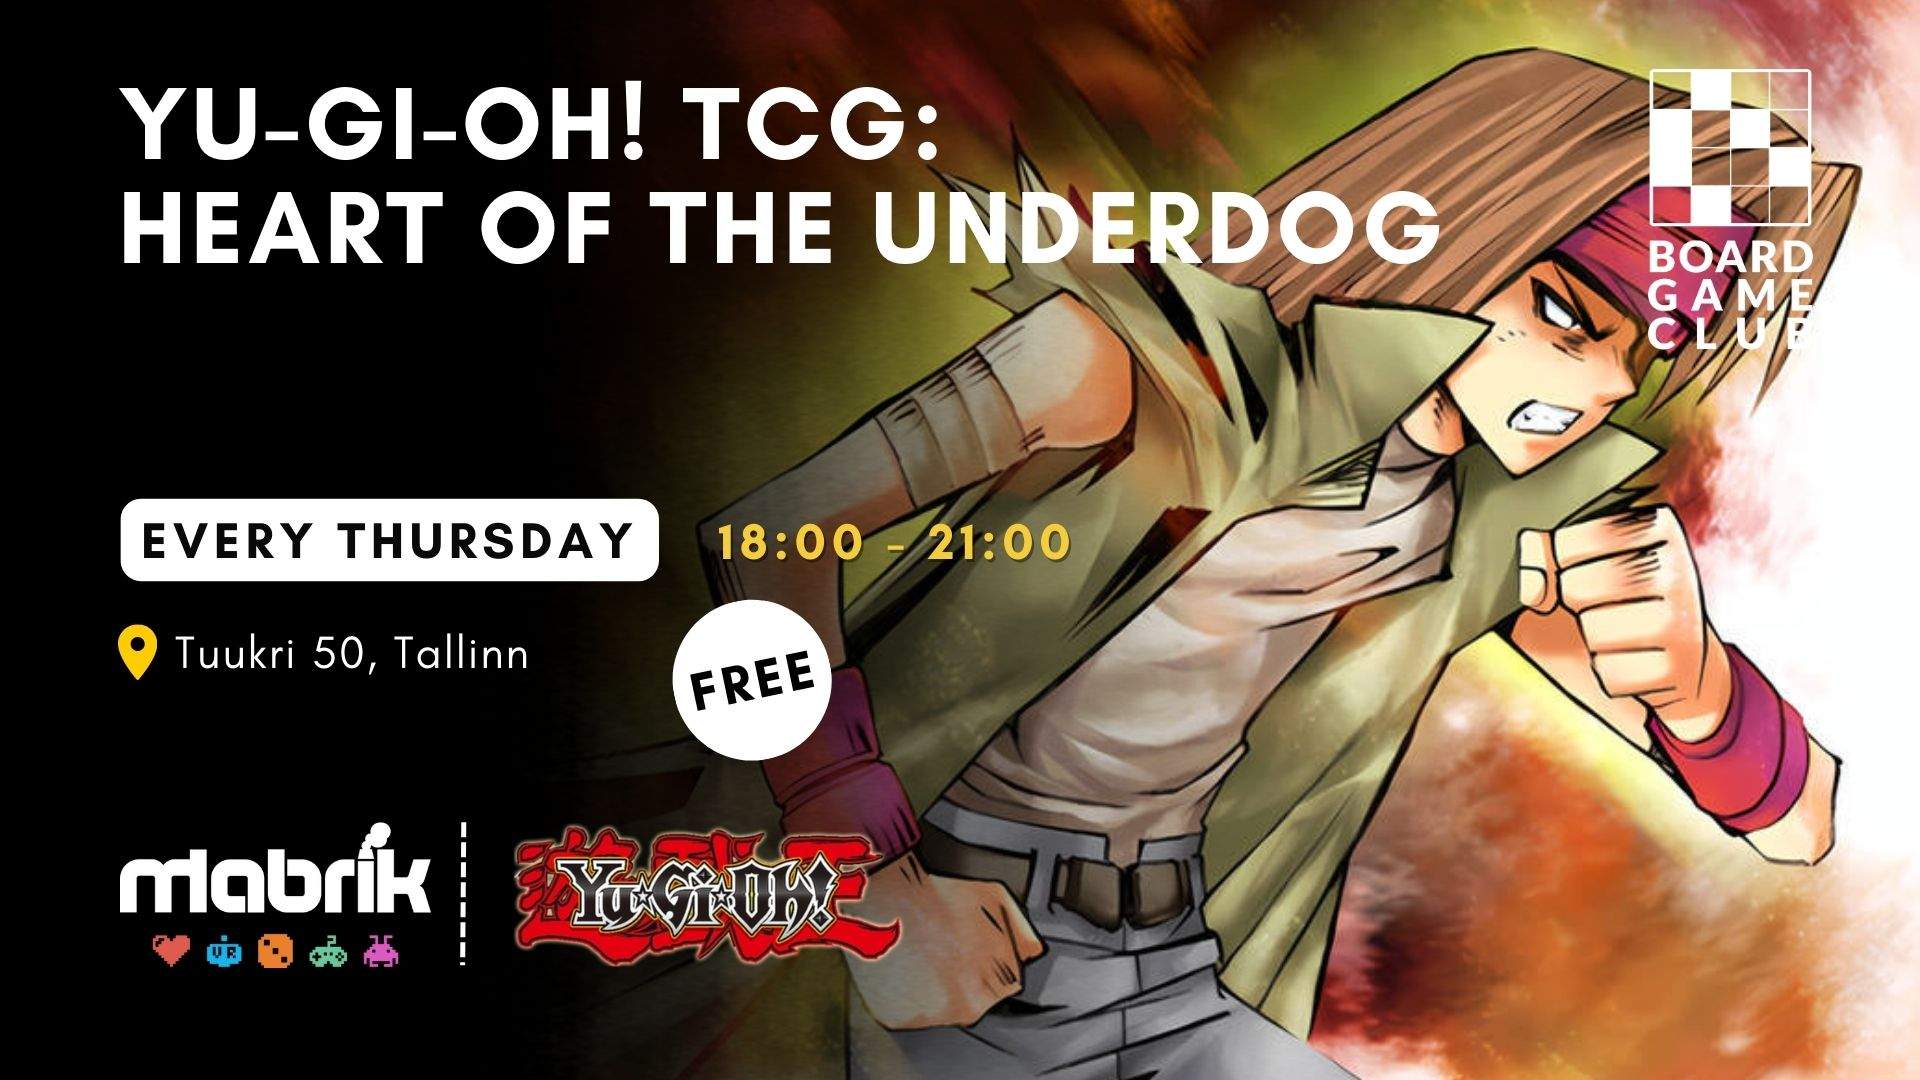 Events - Every Thursday - Yu-Gi-Oh! Heart of the Underdog.